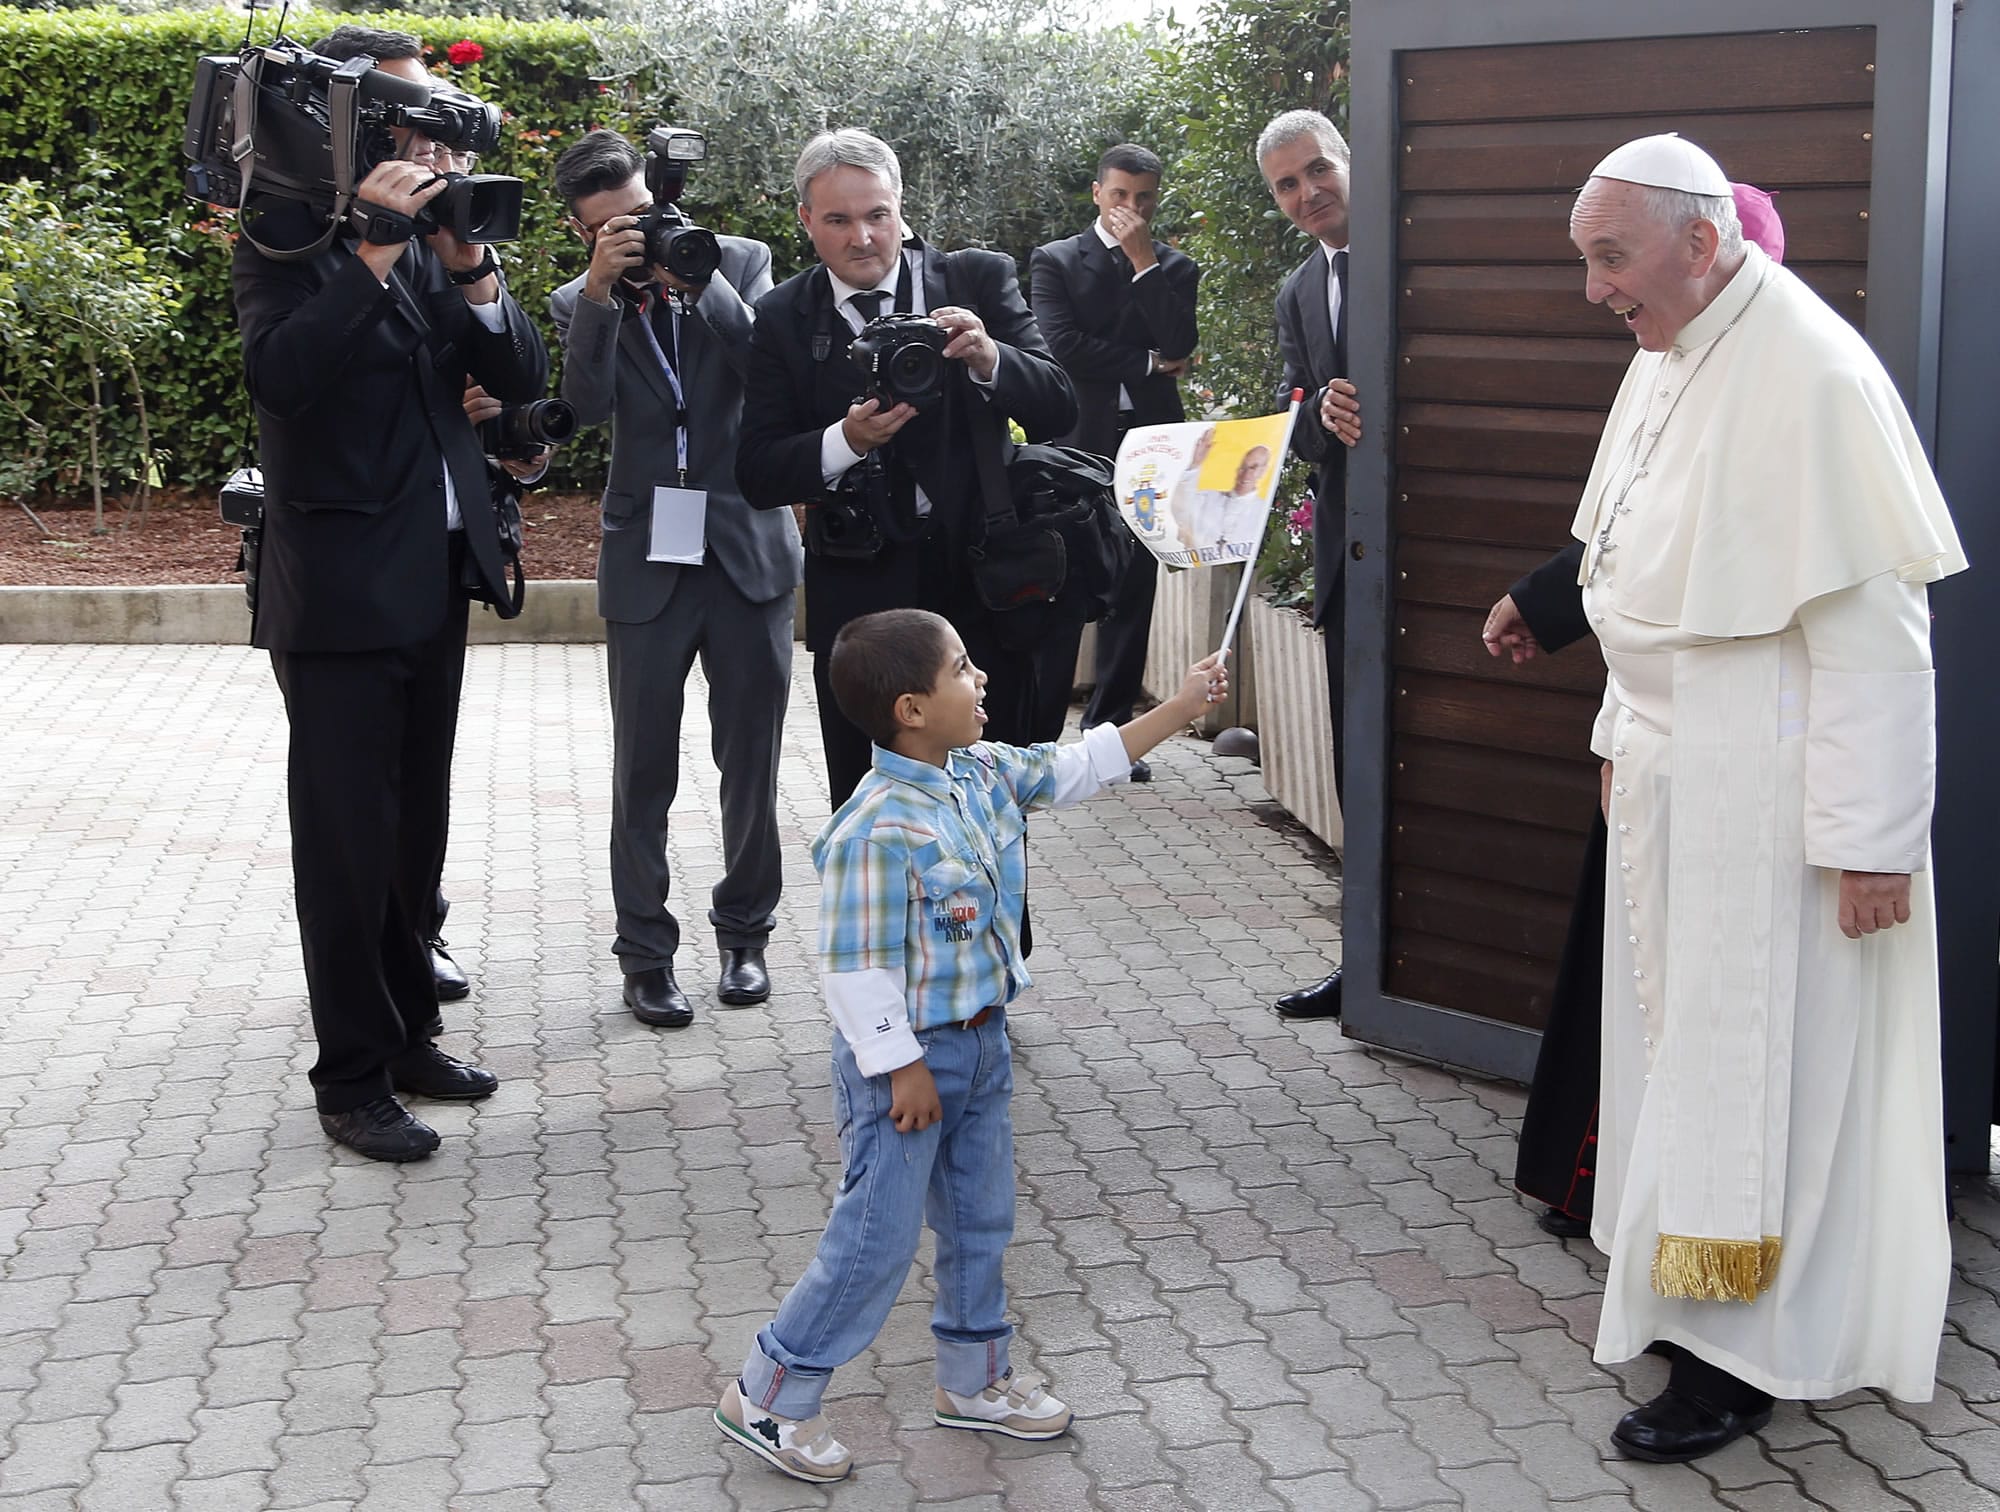 A child waves a flag as Pope Francis arrives Friday at Caritas Residence in Assisi, Italy.